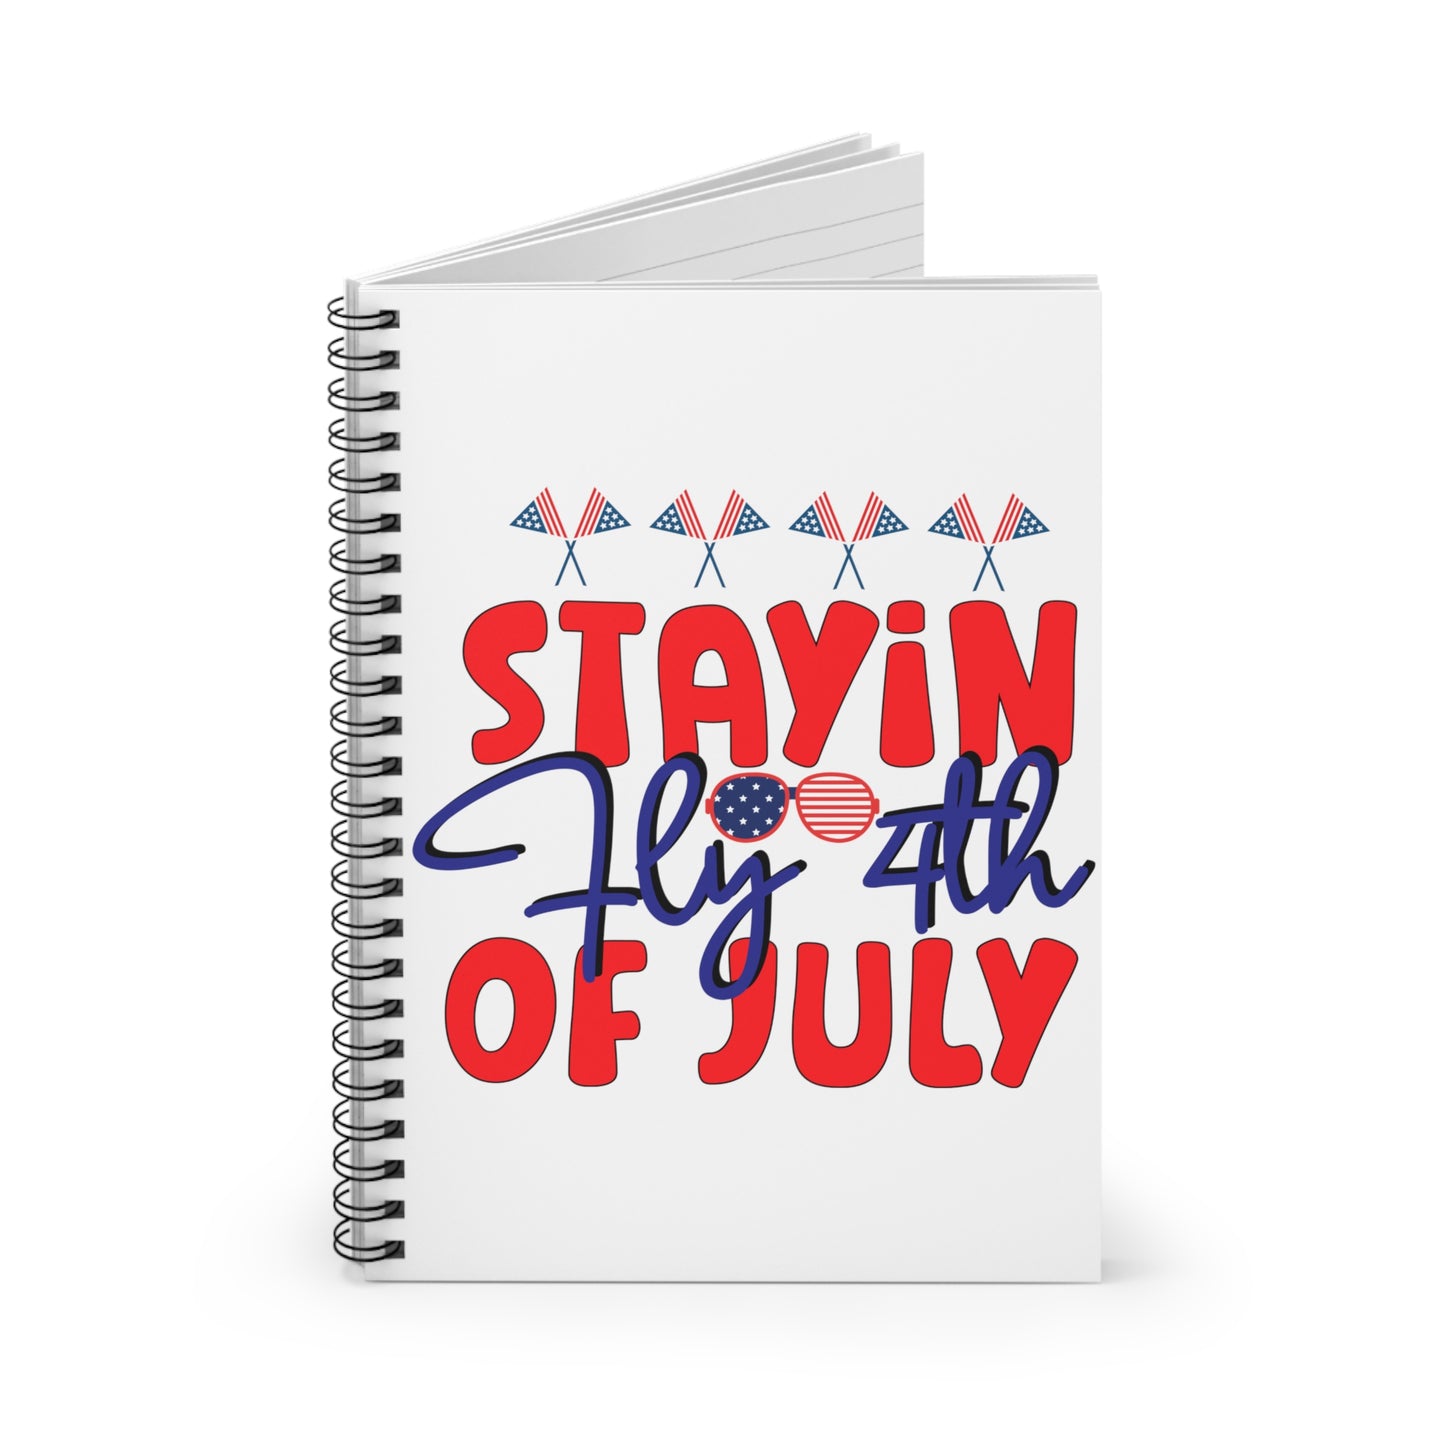 Stayin Fly 4th of July: Spiral Notebook - Log Books - Journals - Diaries - and More Custom Printed by TheGlassyLass.com